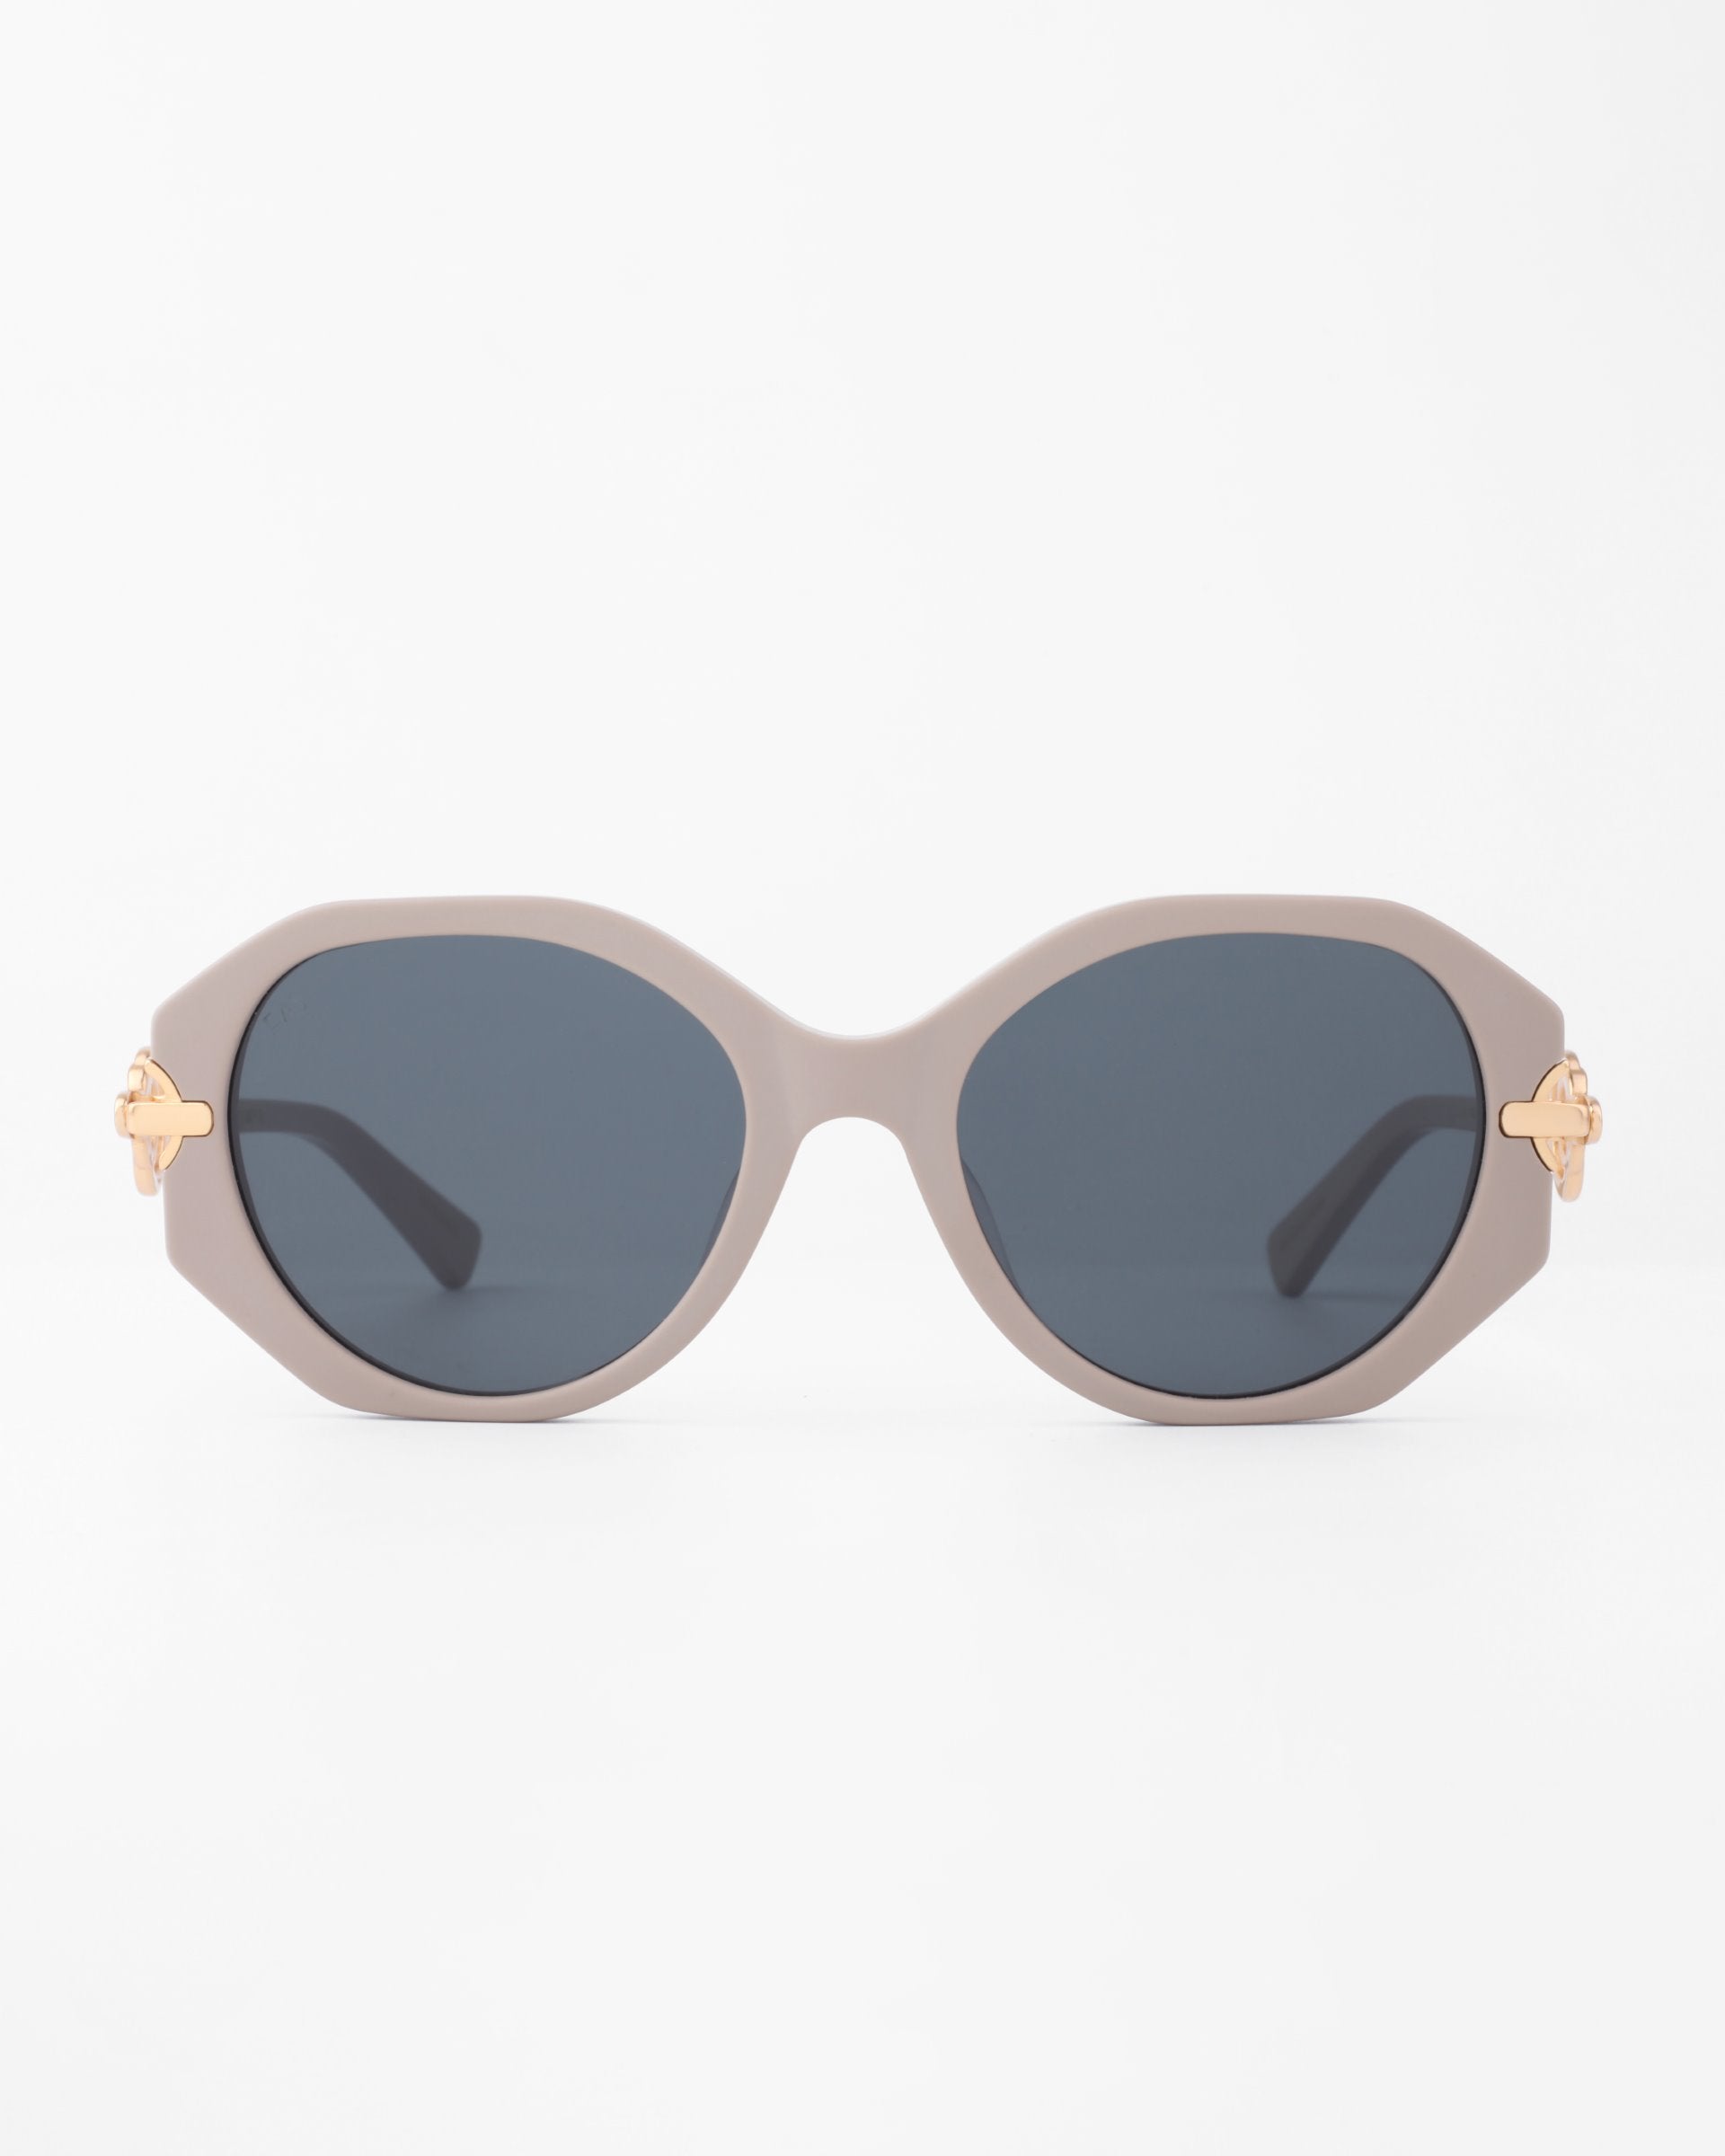 A pair of stylish Seaside sunglasses by For Art&#39;s Sake® with dark oval, shatter-resistant lenses and a light beige, handmade acetate frame. The temples feature gold-plated detailing near the hinges, adding a touch of elegance to the design. The background is solid white.